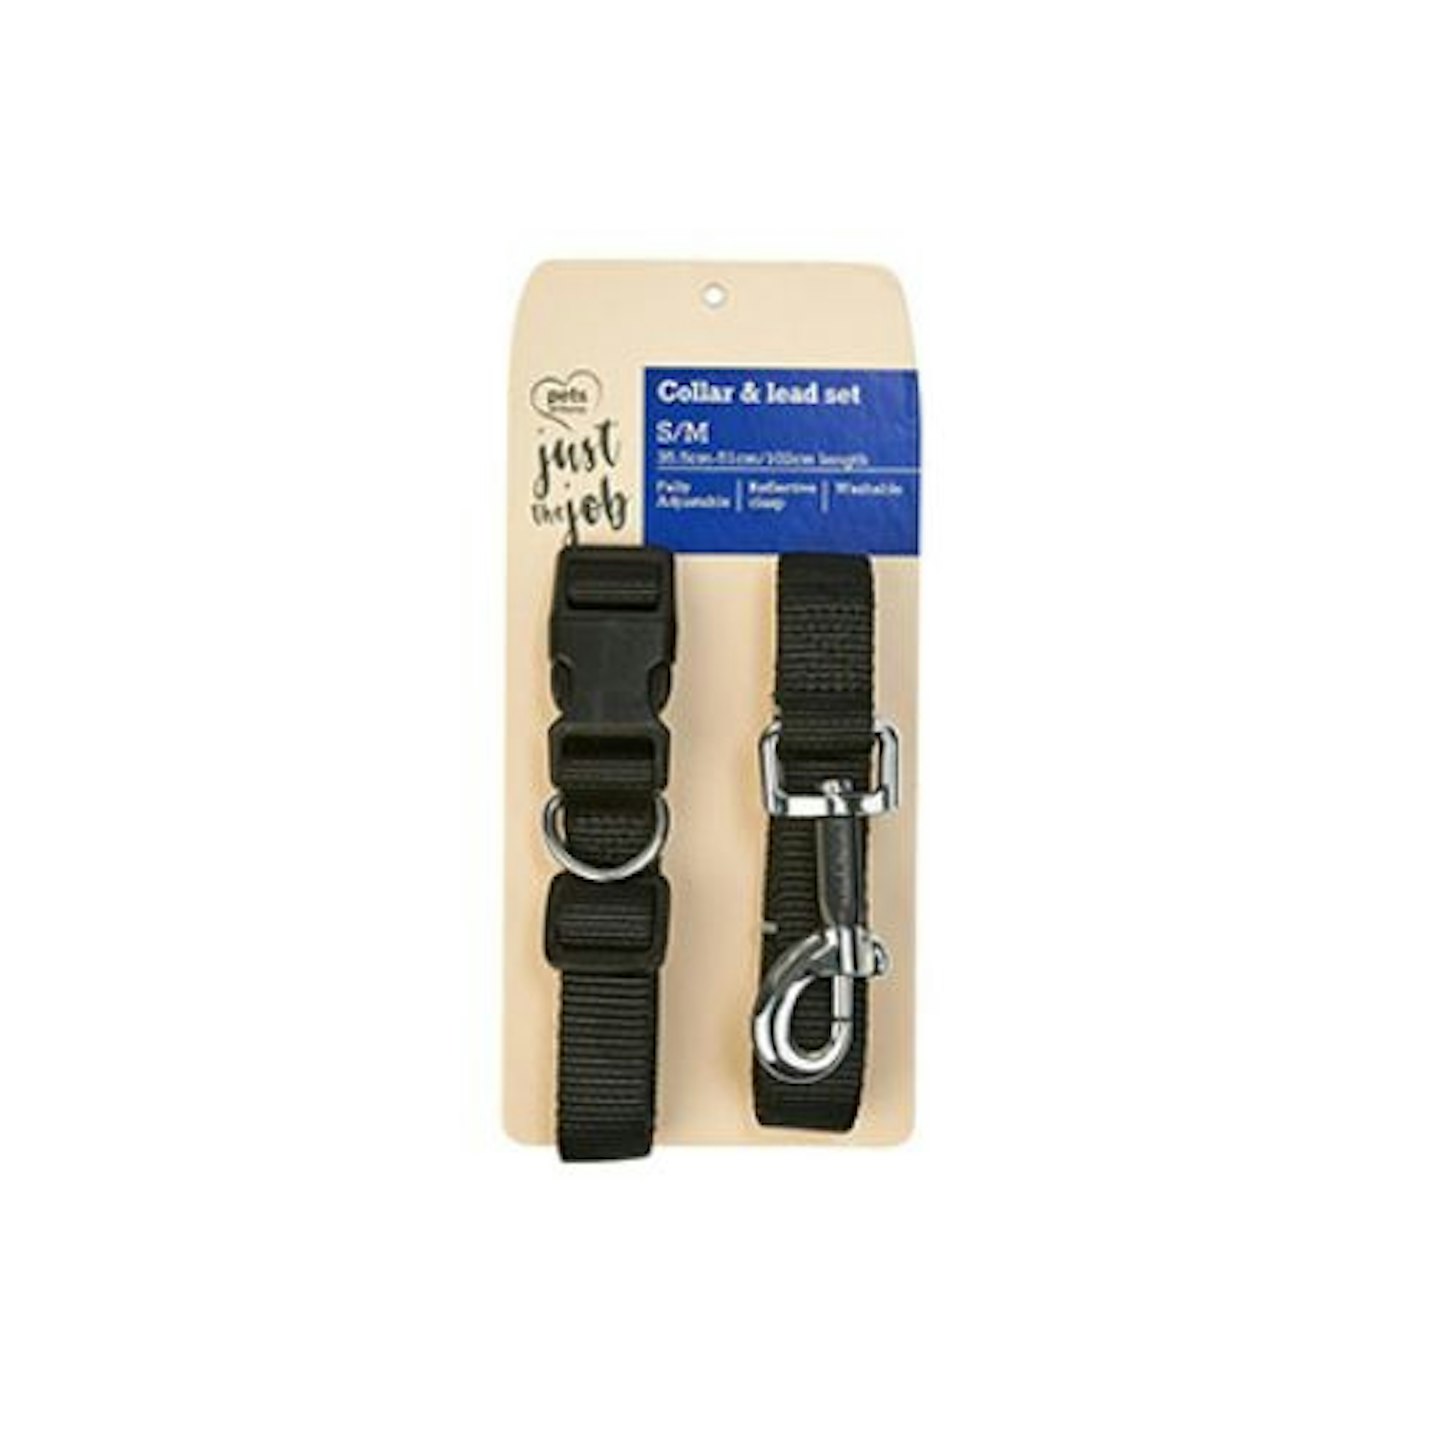 Pets at Home Dog Collar and Lead Set